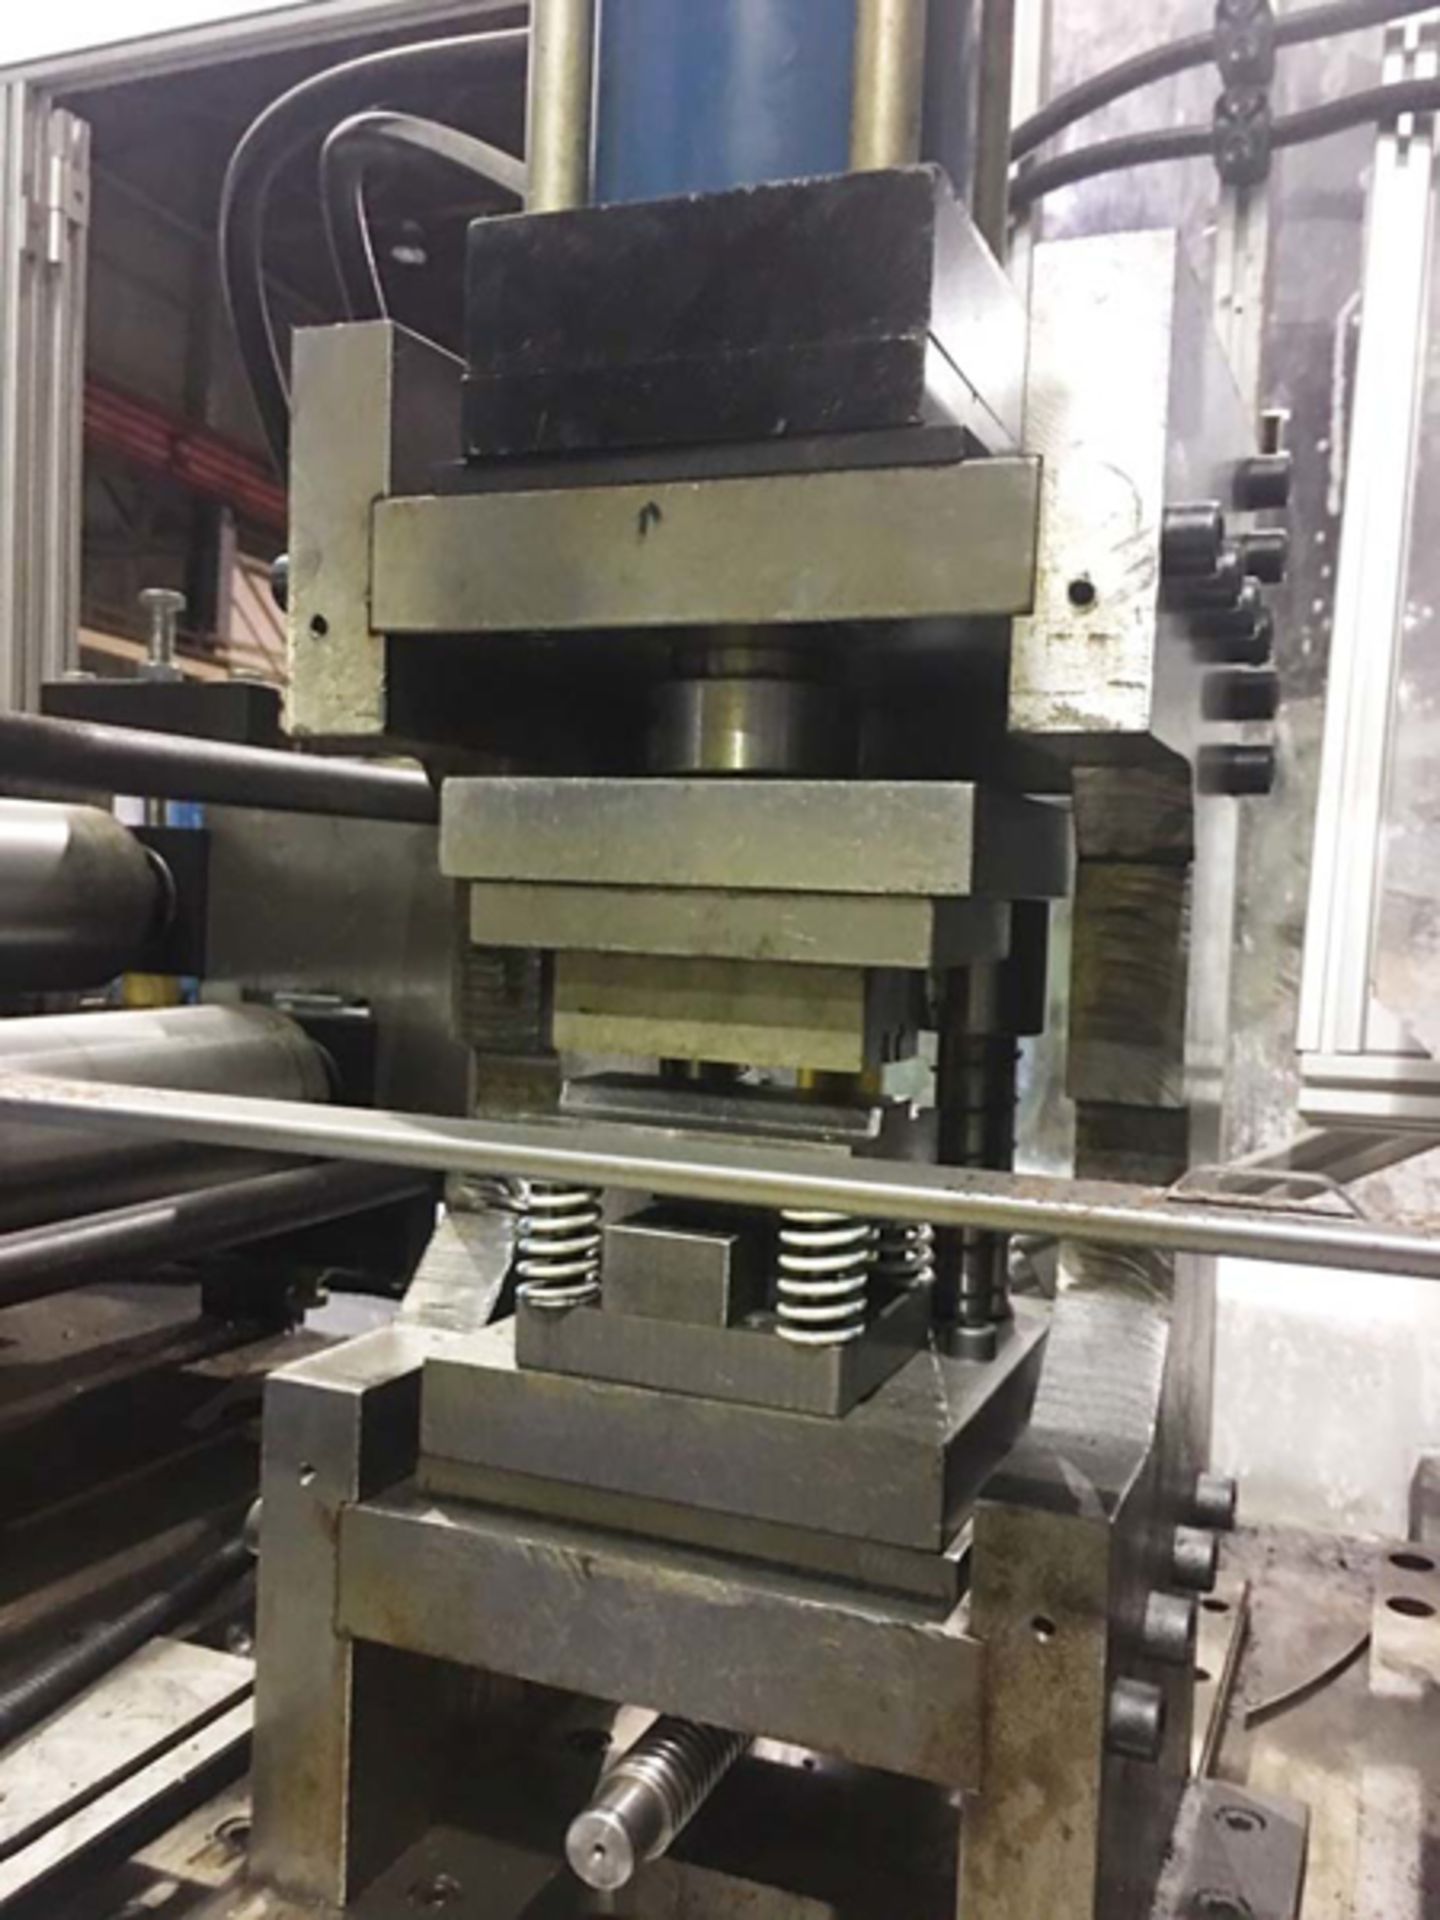 2016 ACL Rollforming Line | 14 Stand x 13.75" RS x 1.5" Shaft, Mdl: LZJ-HCB, S/N: 16111001, - Image 10 of 11